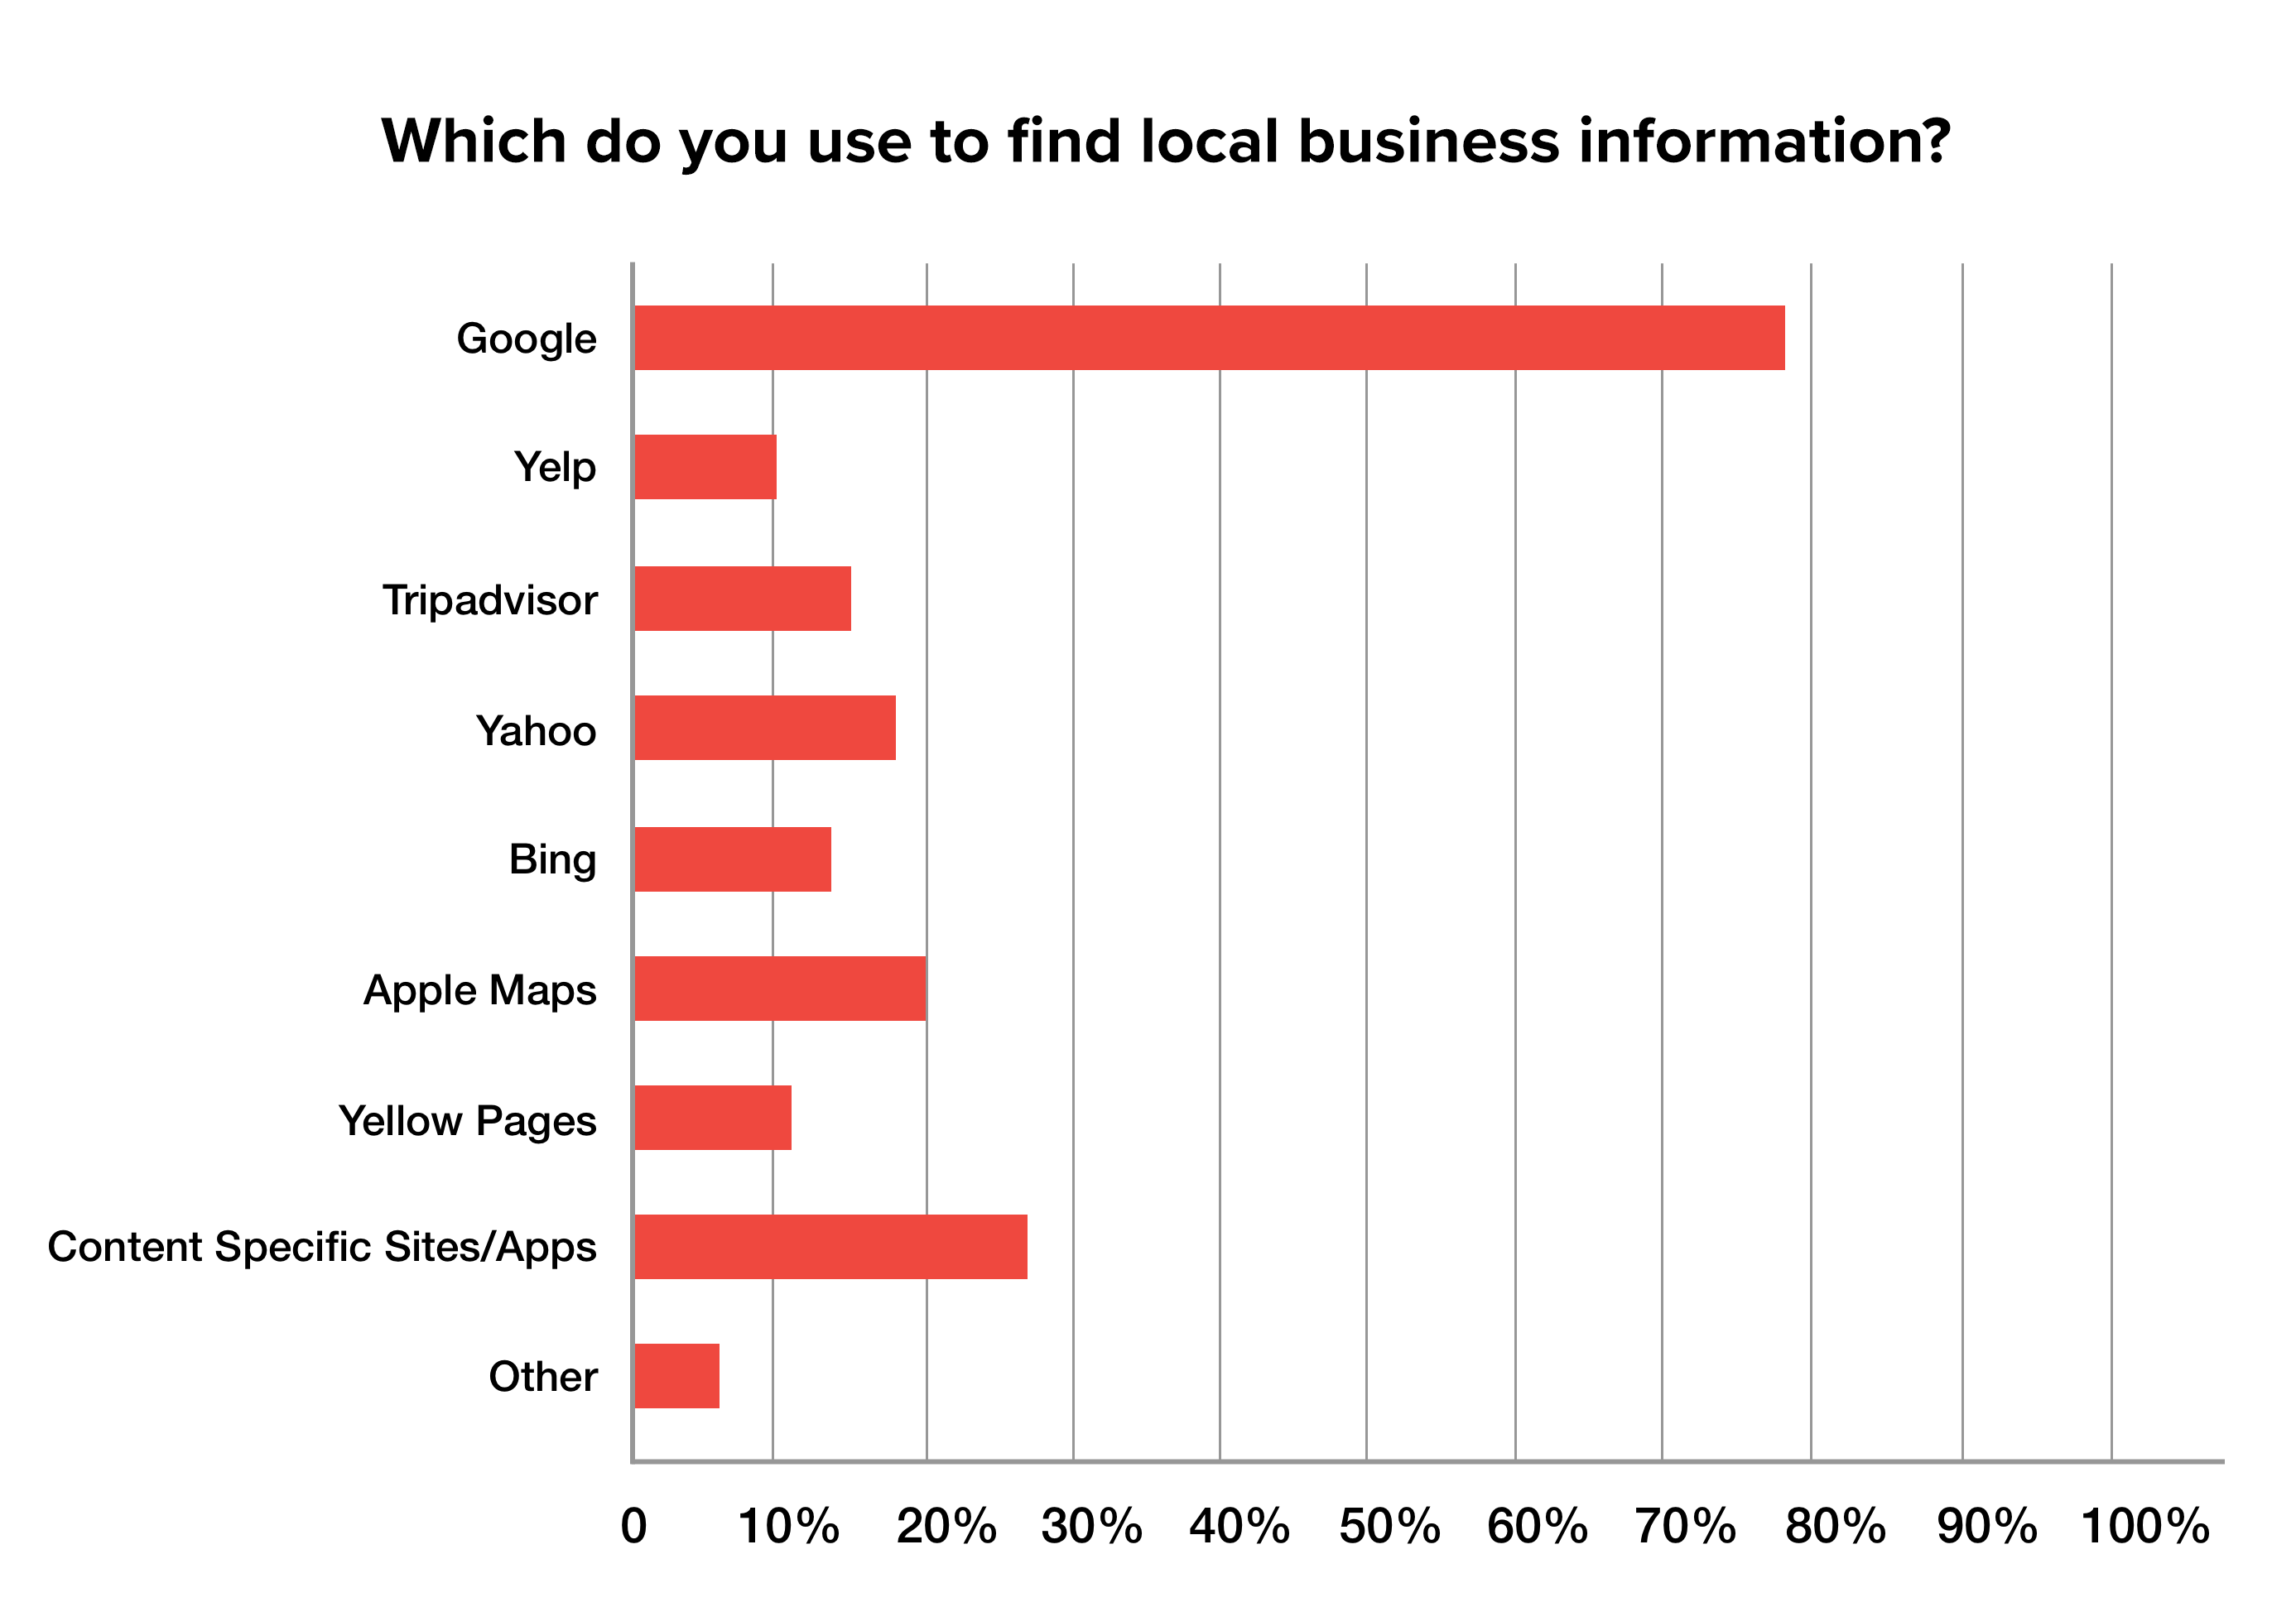 Which do you use to find local business information?